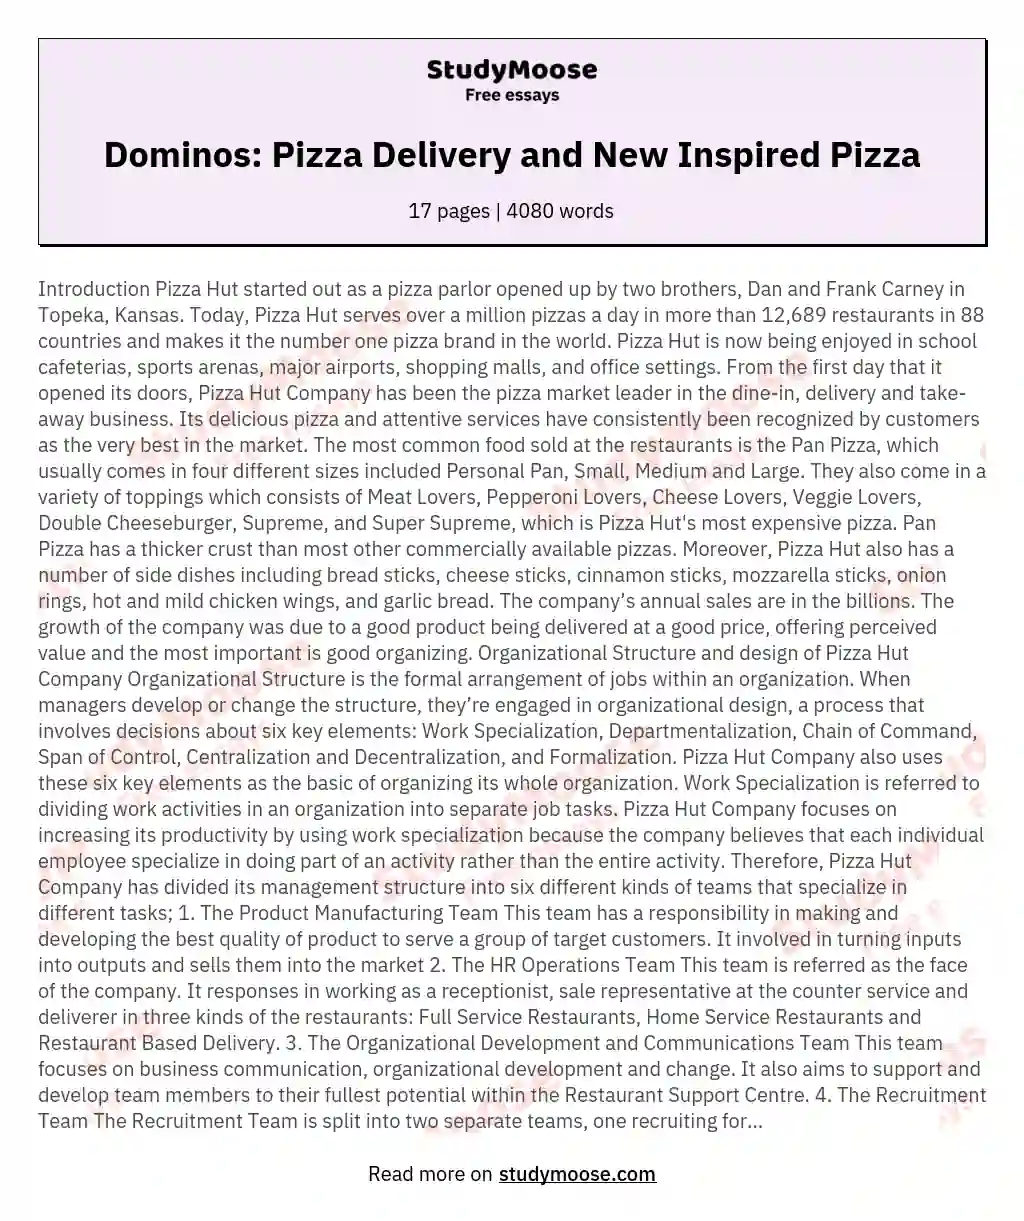 Dominos: Pizza Delivery and New Inspired Pizza